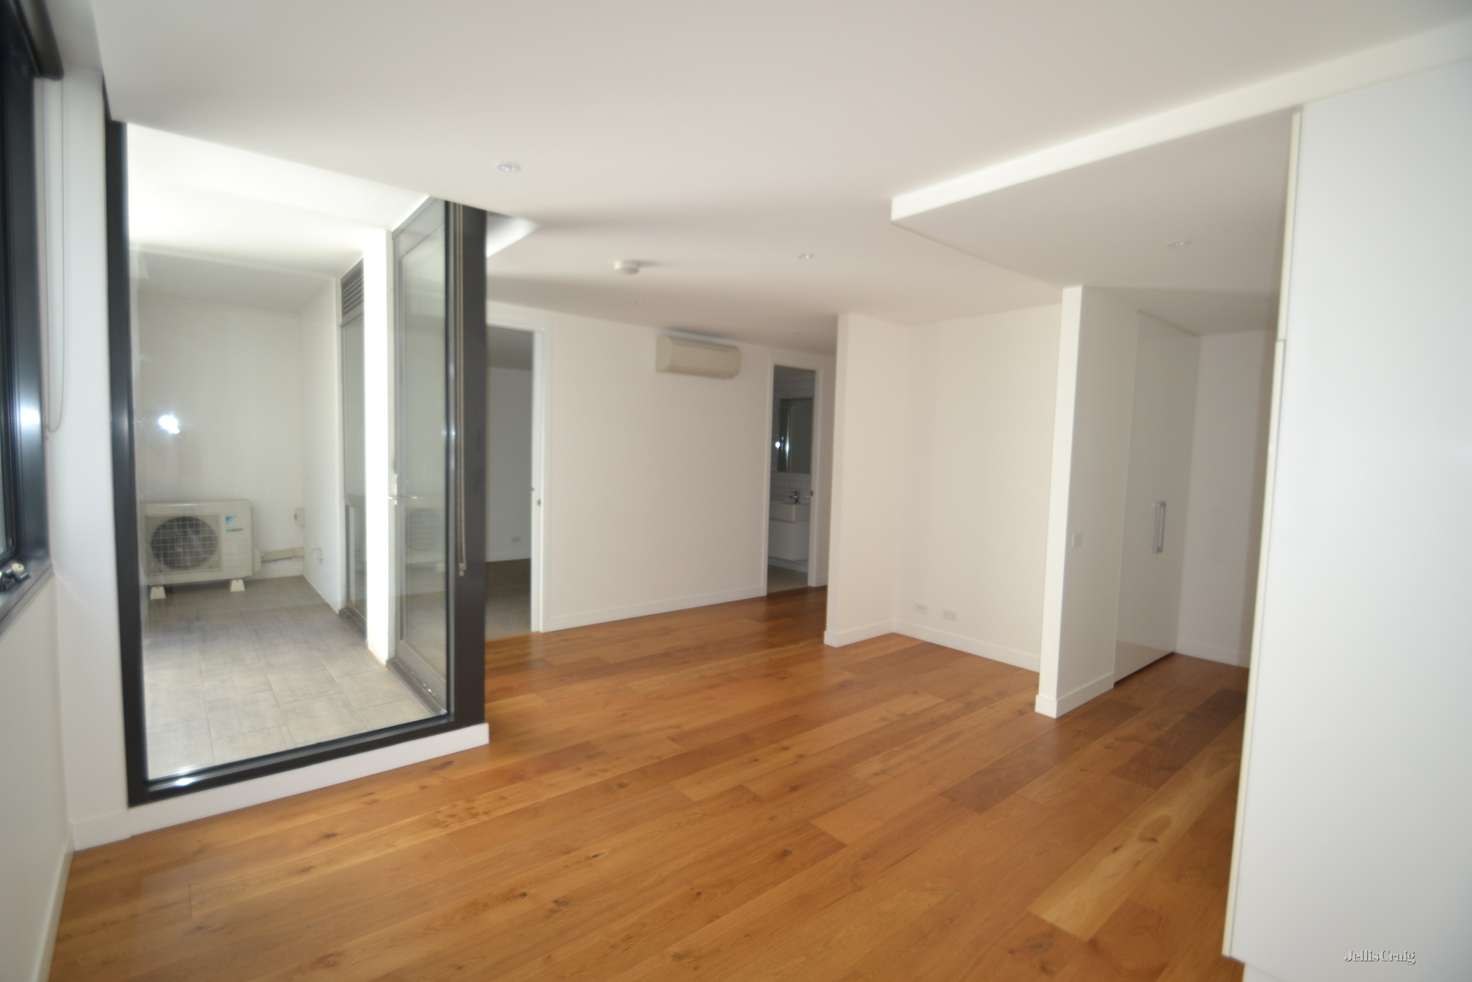 Main view of Homely apartment listing, 103/62 Station  Street, Fairfield VIC 3078